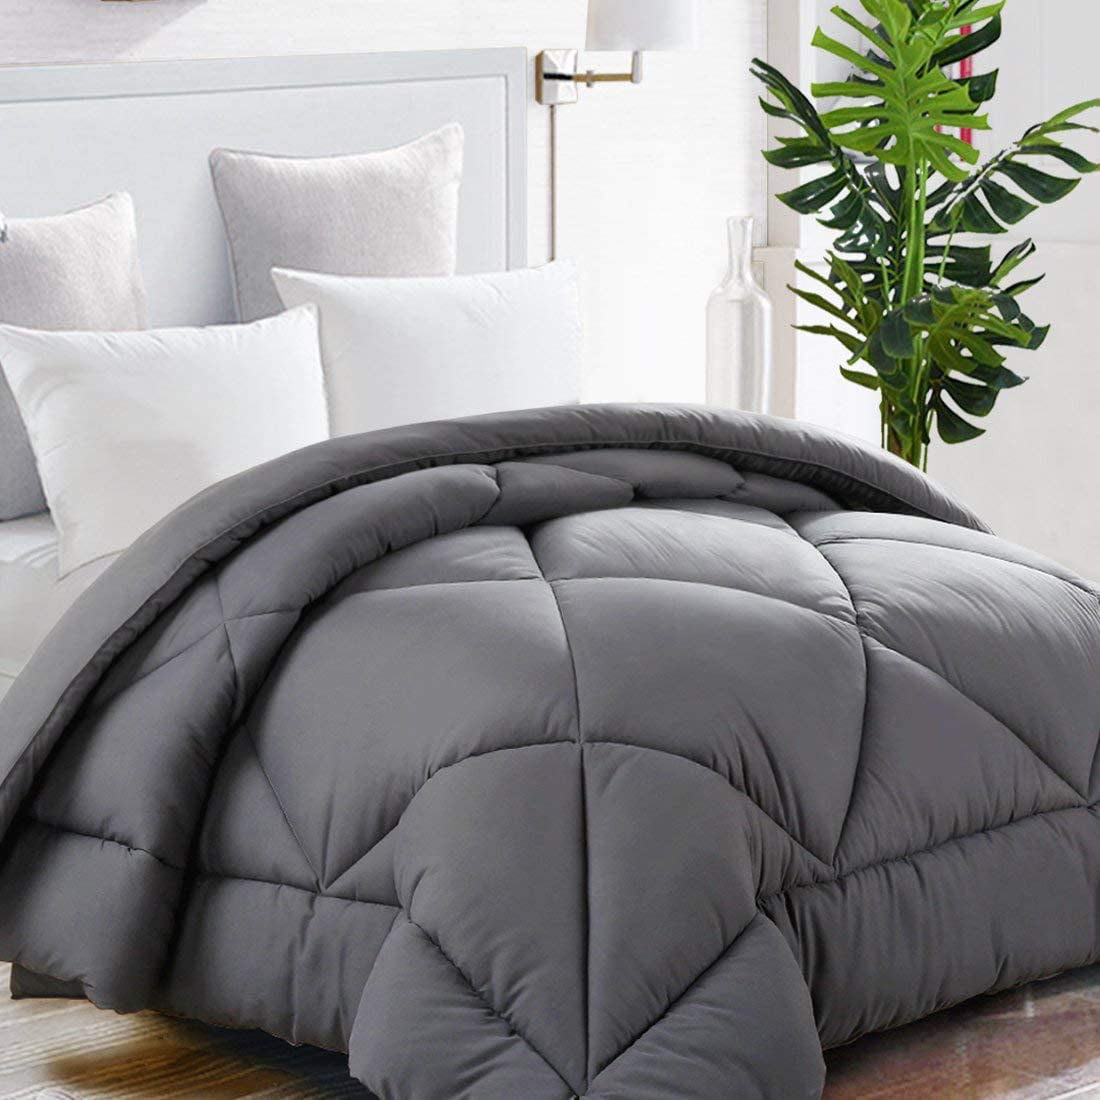 Luxury Fluffy Reversible Hotel Collection,Charcoal Grey,64 x 88 inches TEKAMON All Season Twin Comforter Winter Warm Soft Quilted Down Alternative Duvet Insert with Corner Tabs